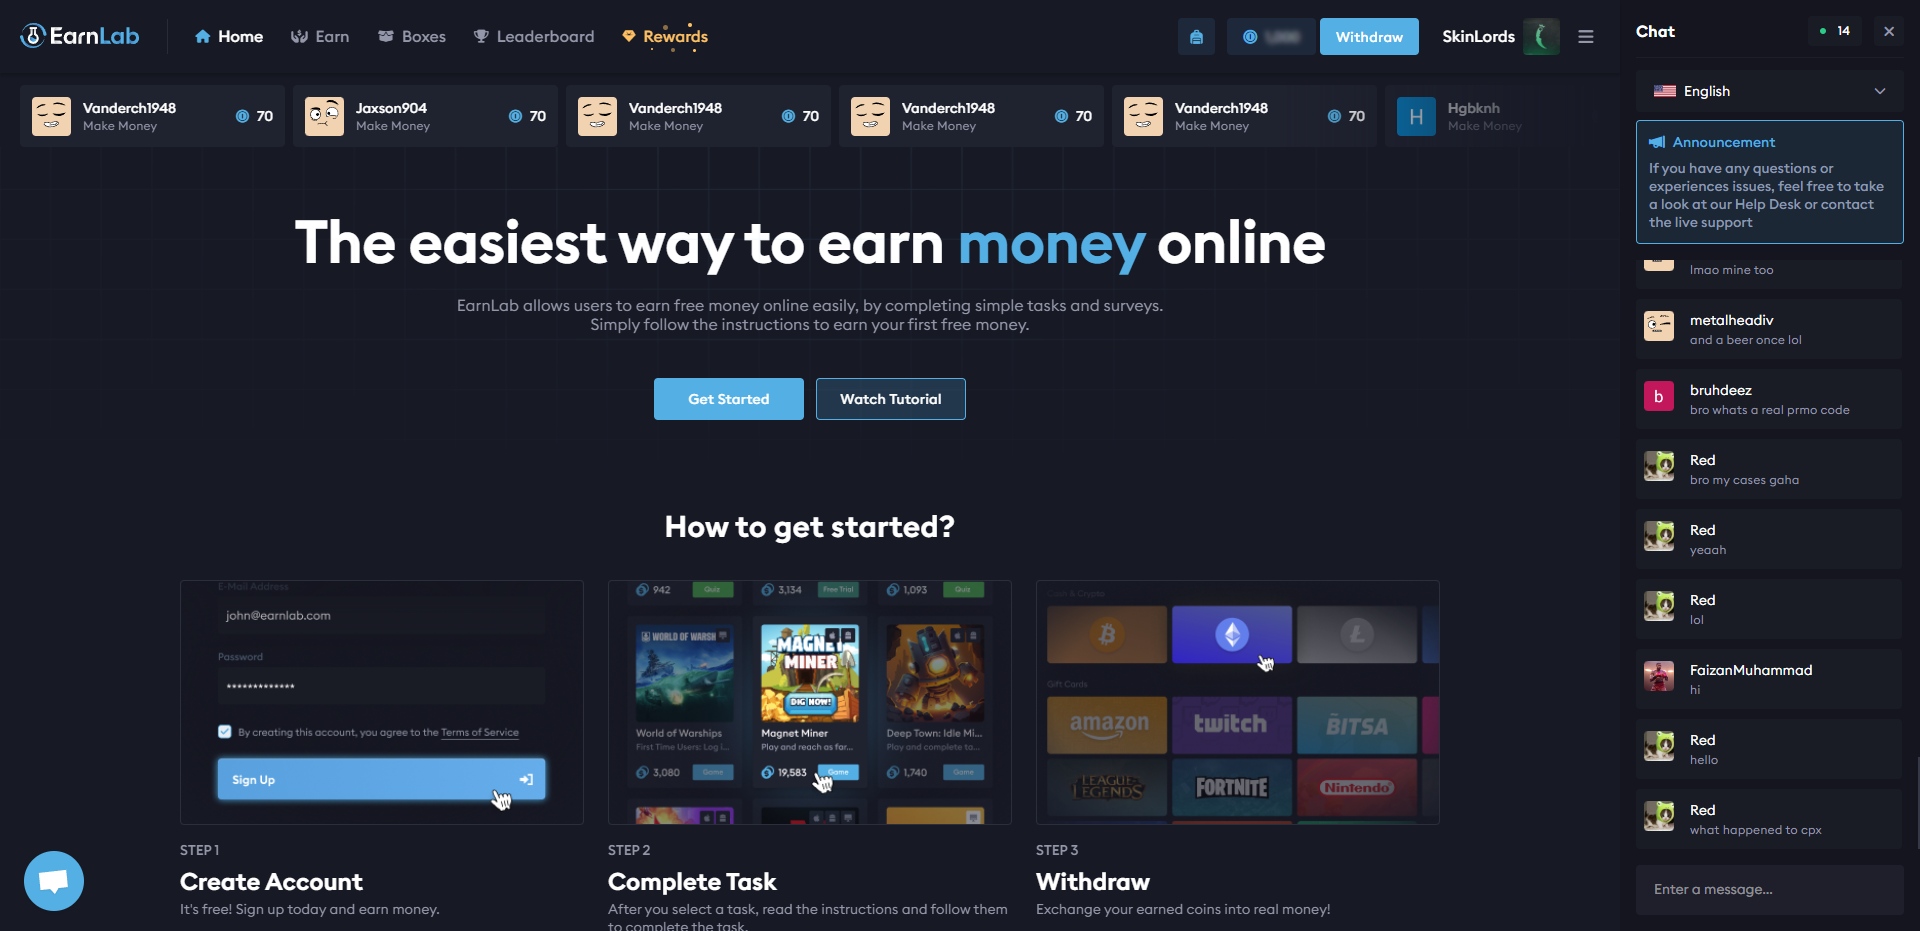 EarnLab Home Landing Page